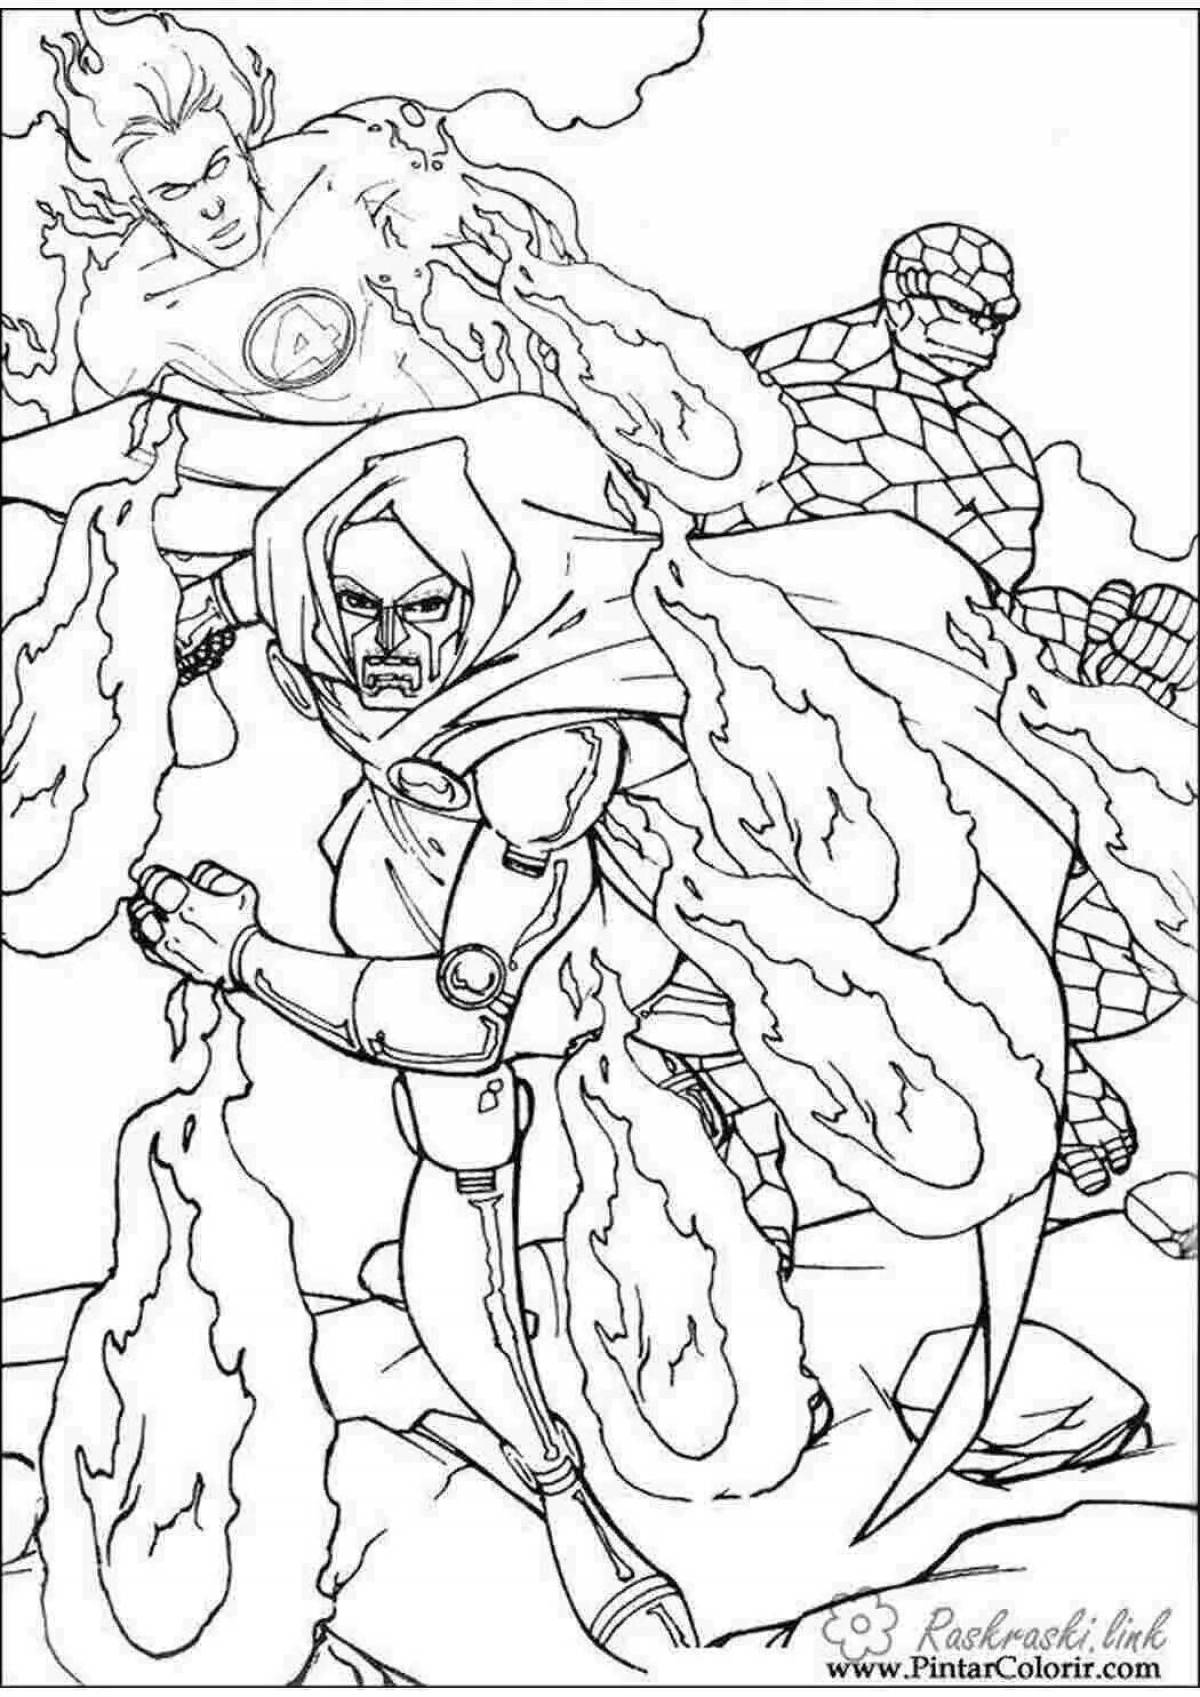 Doomsday coloring page